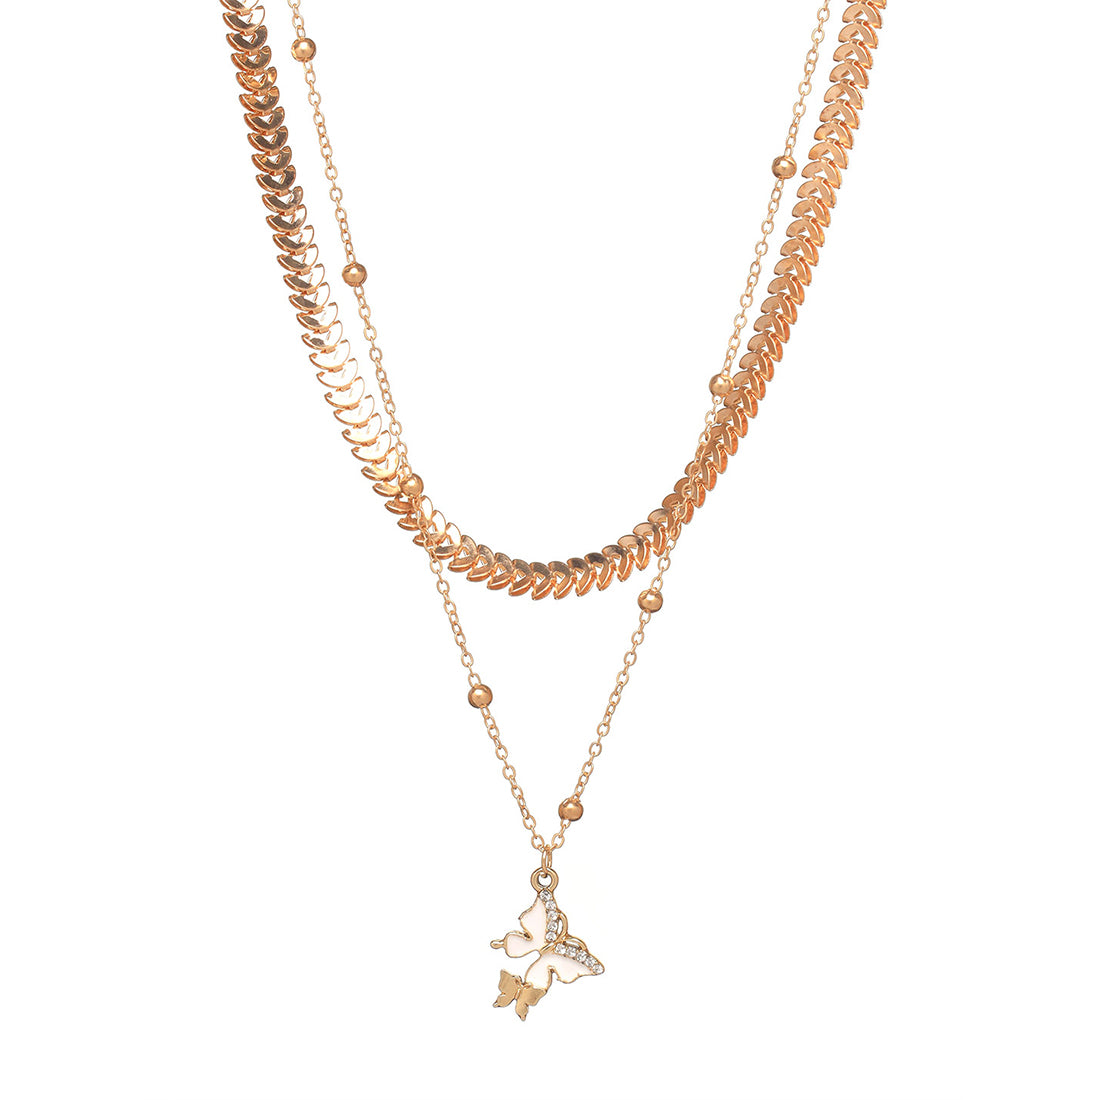 Chic & Trendy Two Layered Gold Necklace with Double Butterfly Pendant